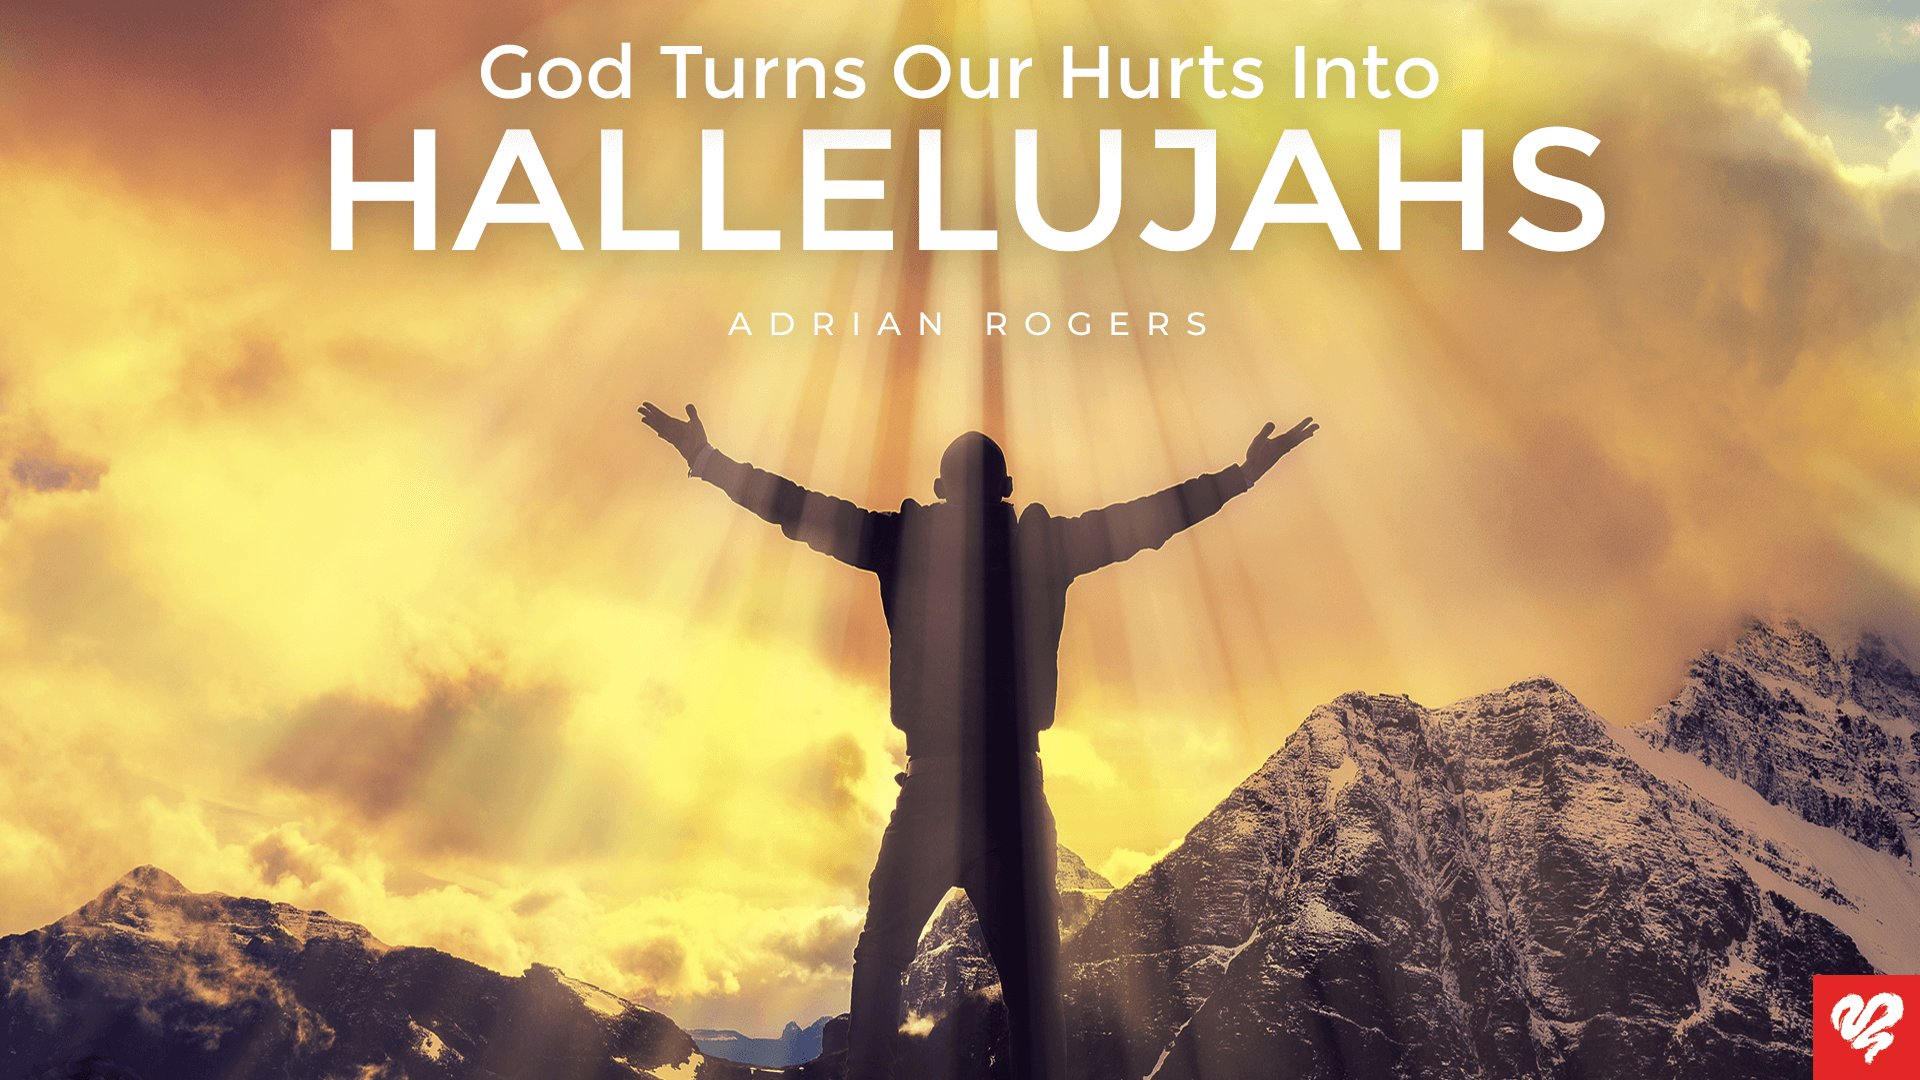 God Turns Our Hurts into Hallelujahs Article 1920x1080